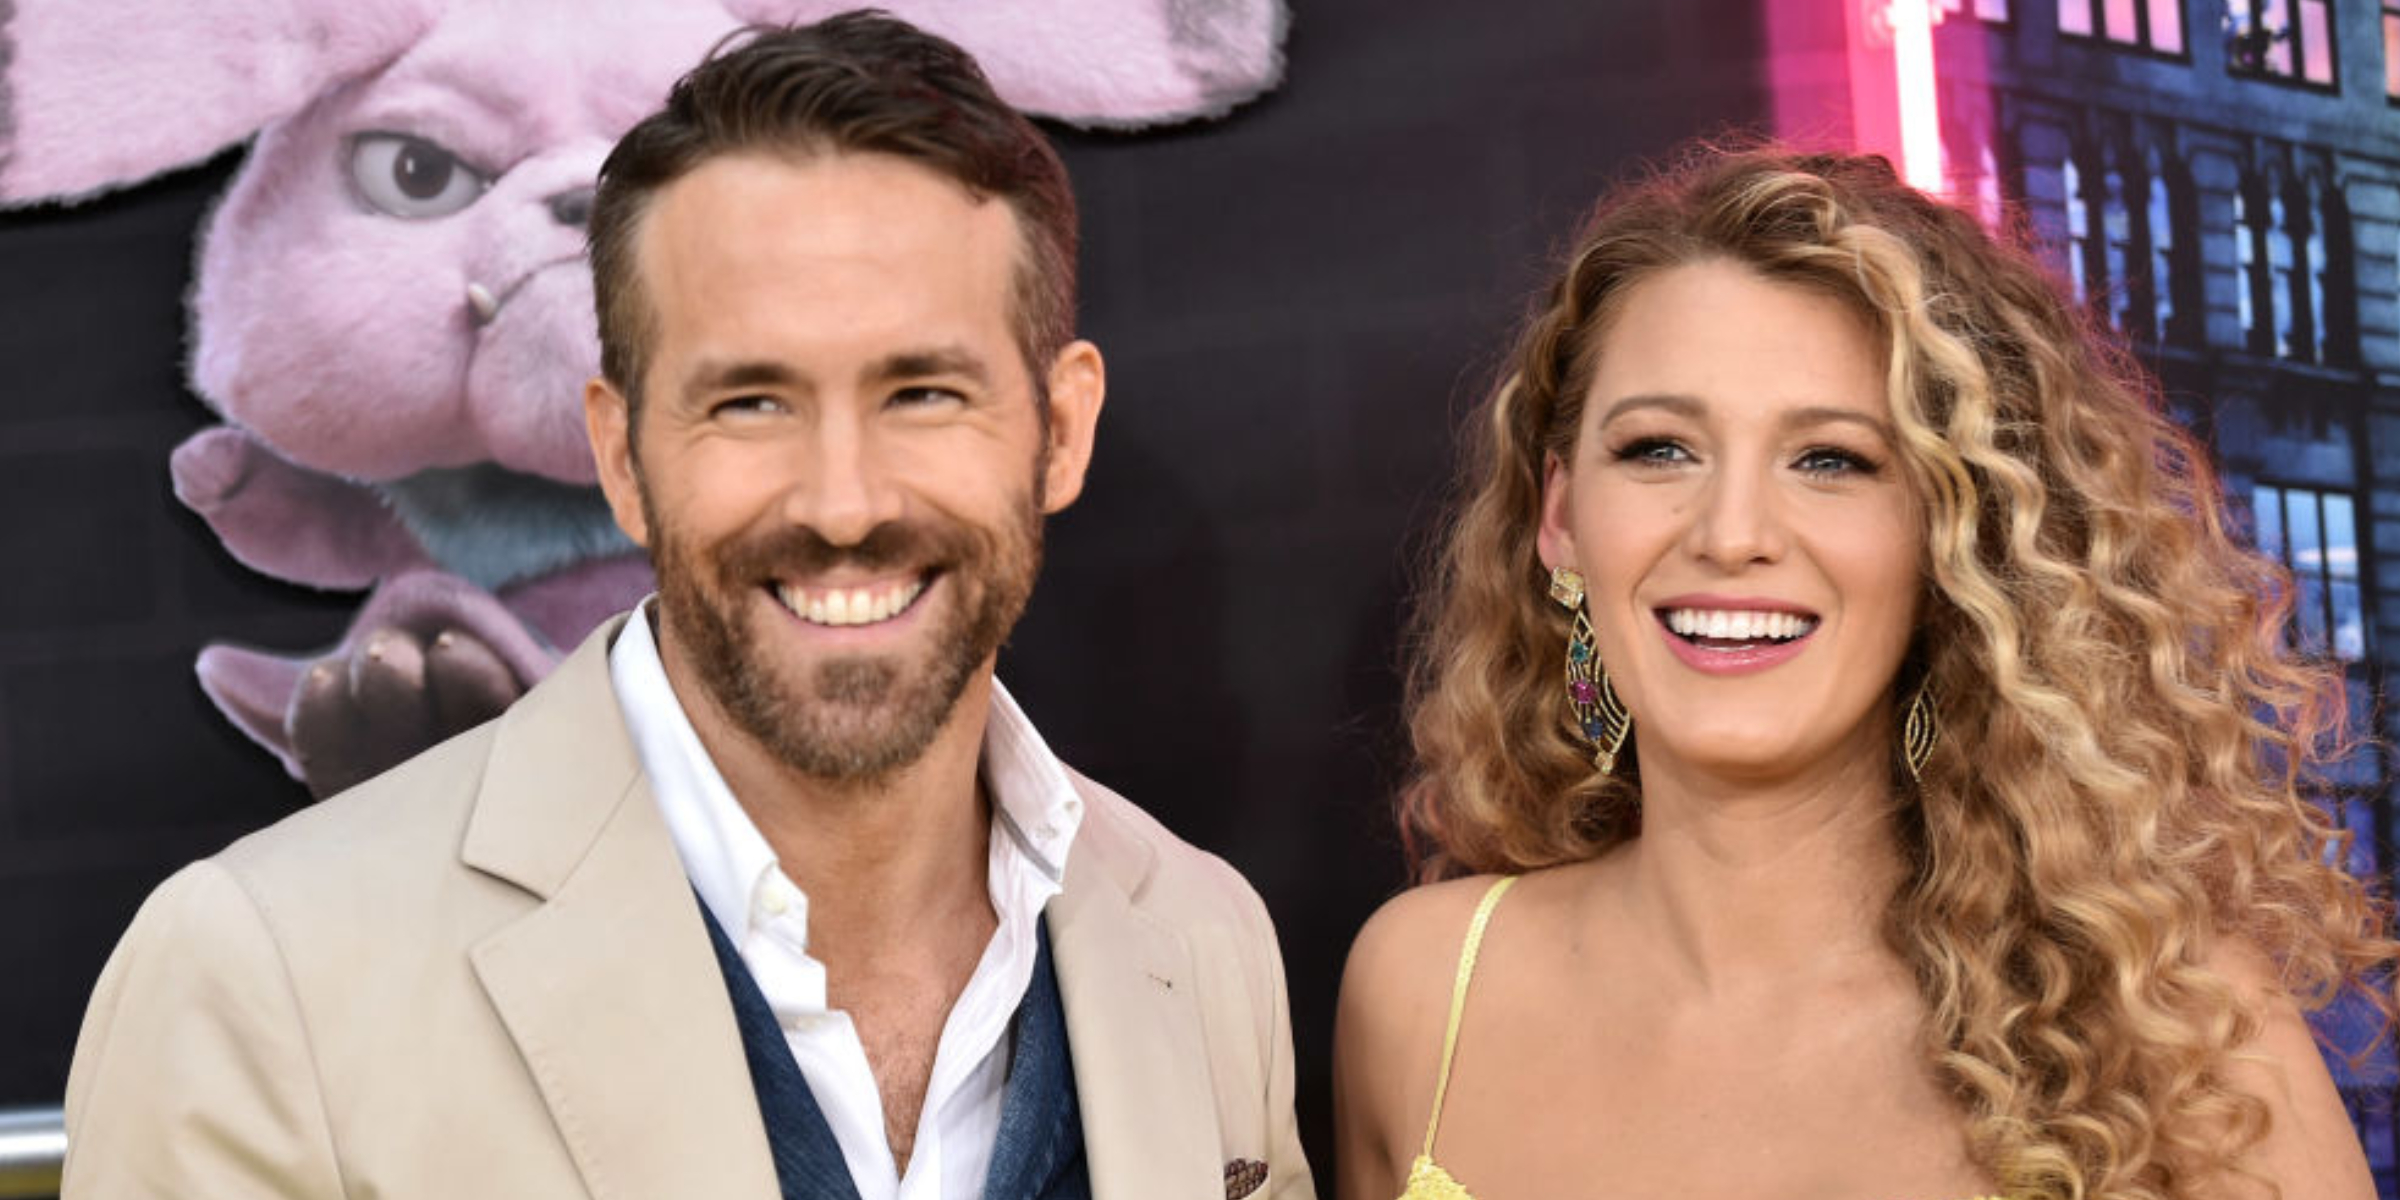 Ryan Reynolds and Blake Lively | Source: Getty Images